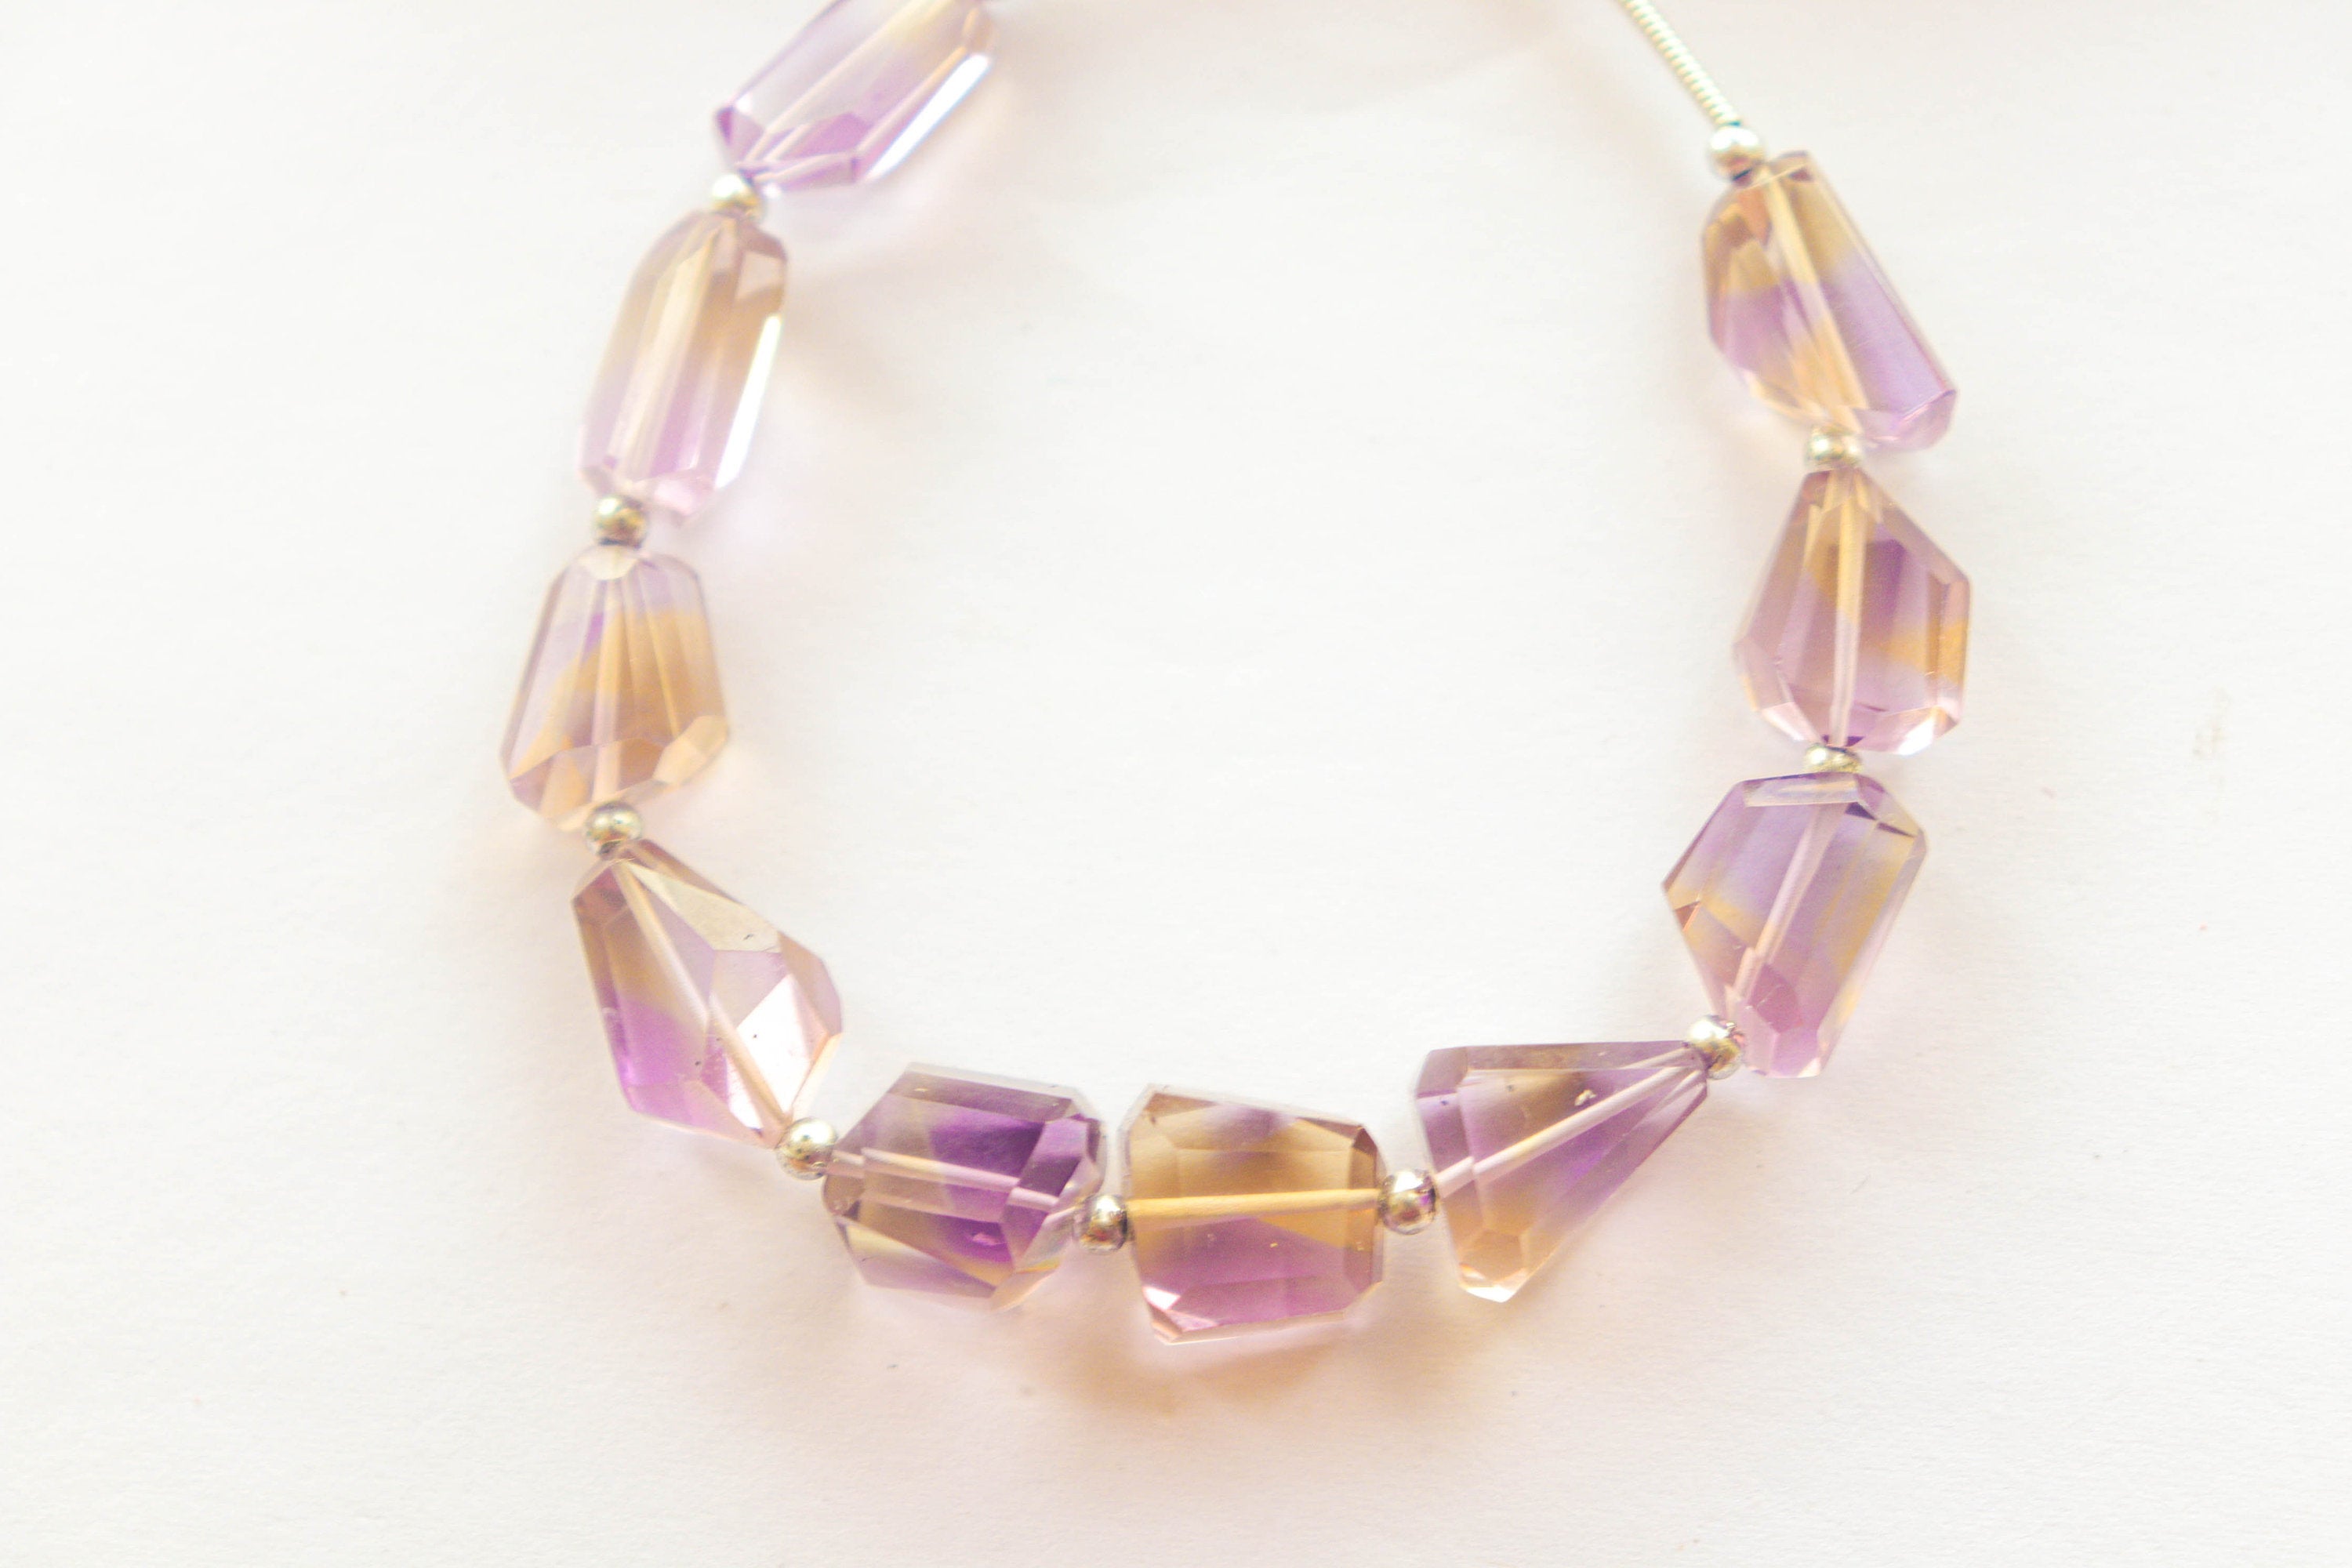 Ametrine Beads Uneven Shape Faceted Tumbles | 6x12mm-10x12mm | 10 Pieces | 5 inch | High Quality Ametrine Gemstone | Beadsforyourjewellery Beadsforyourjewelry